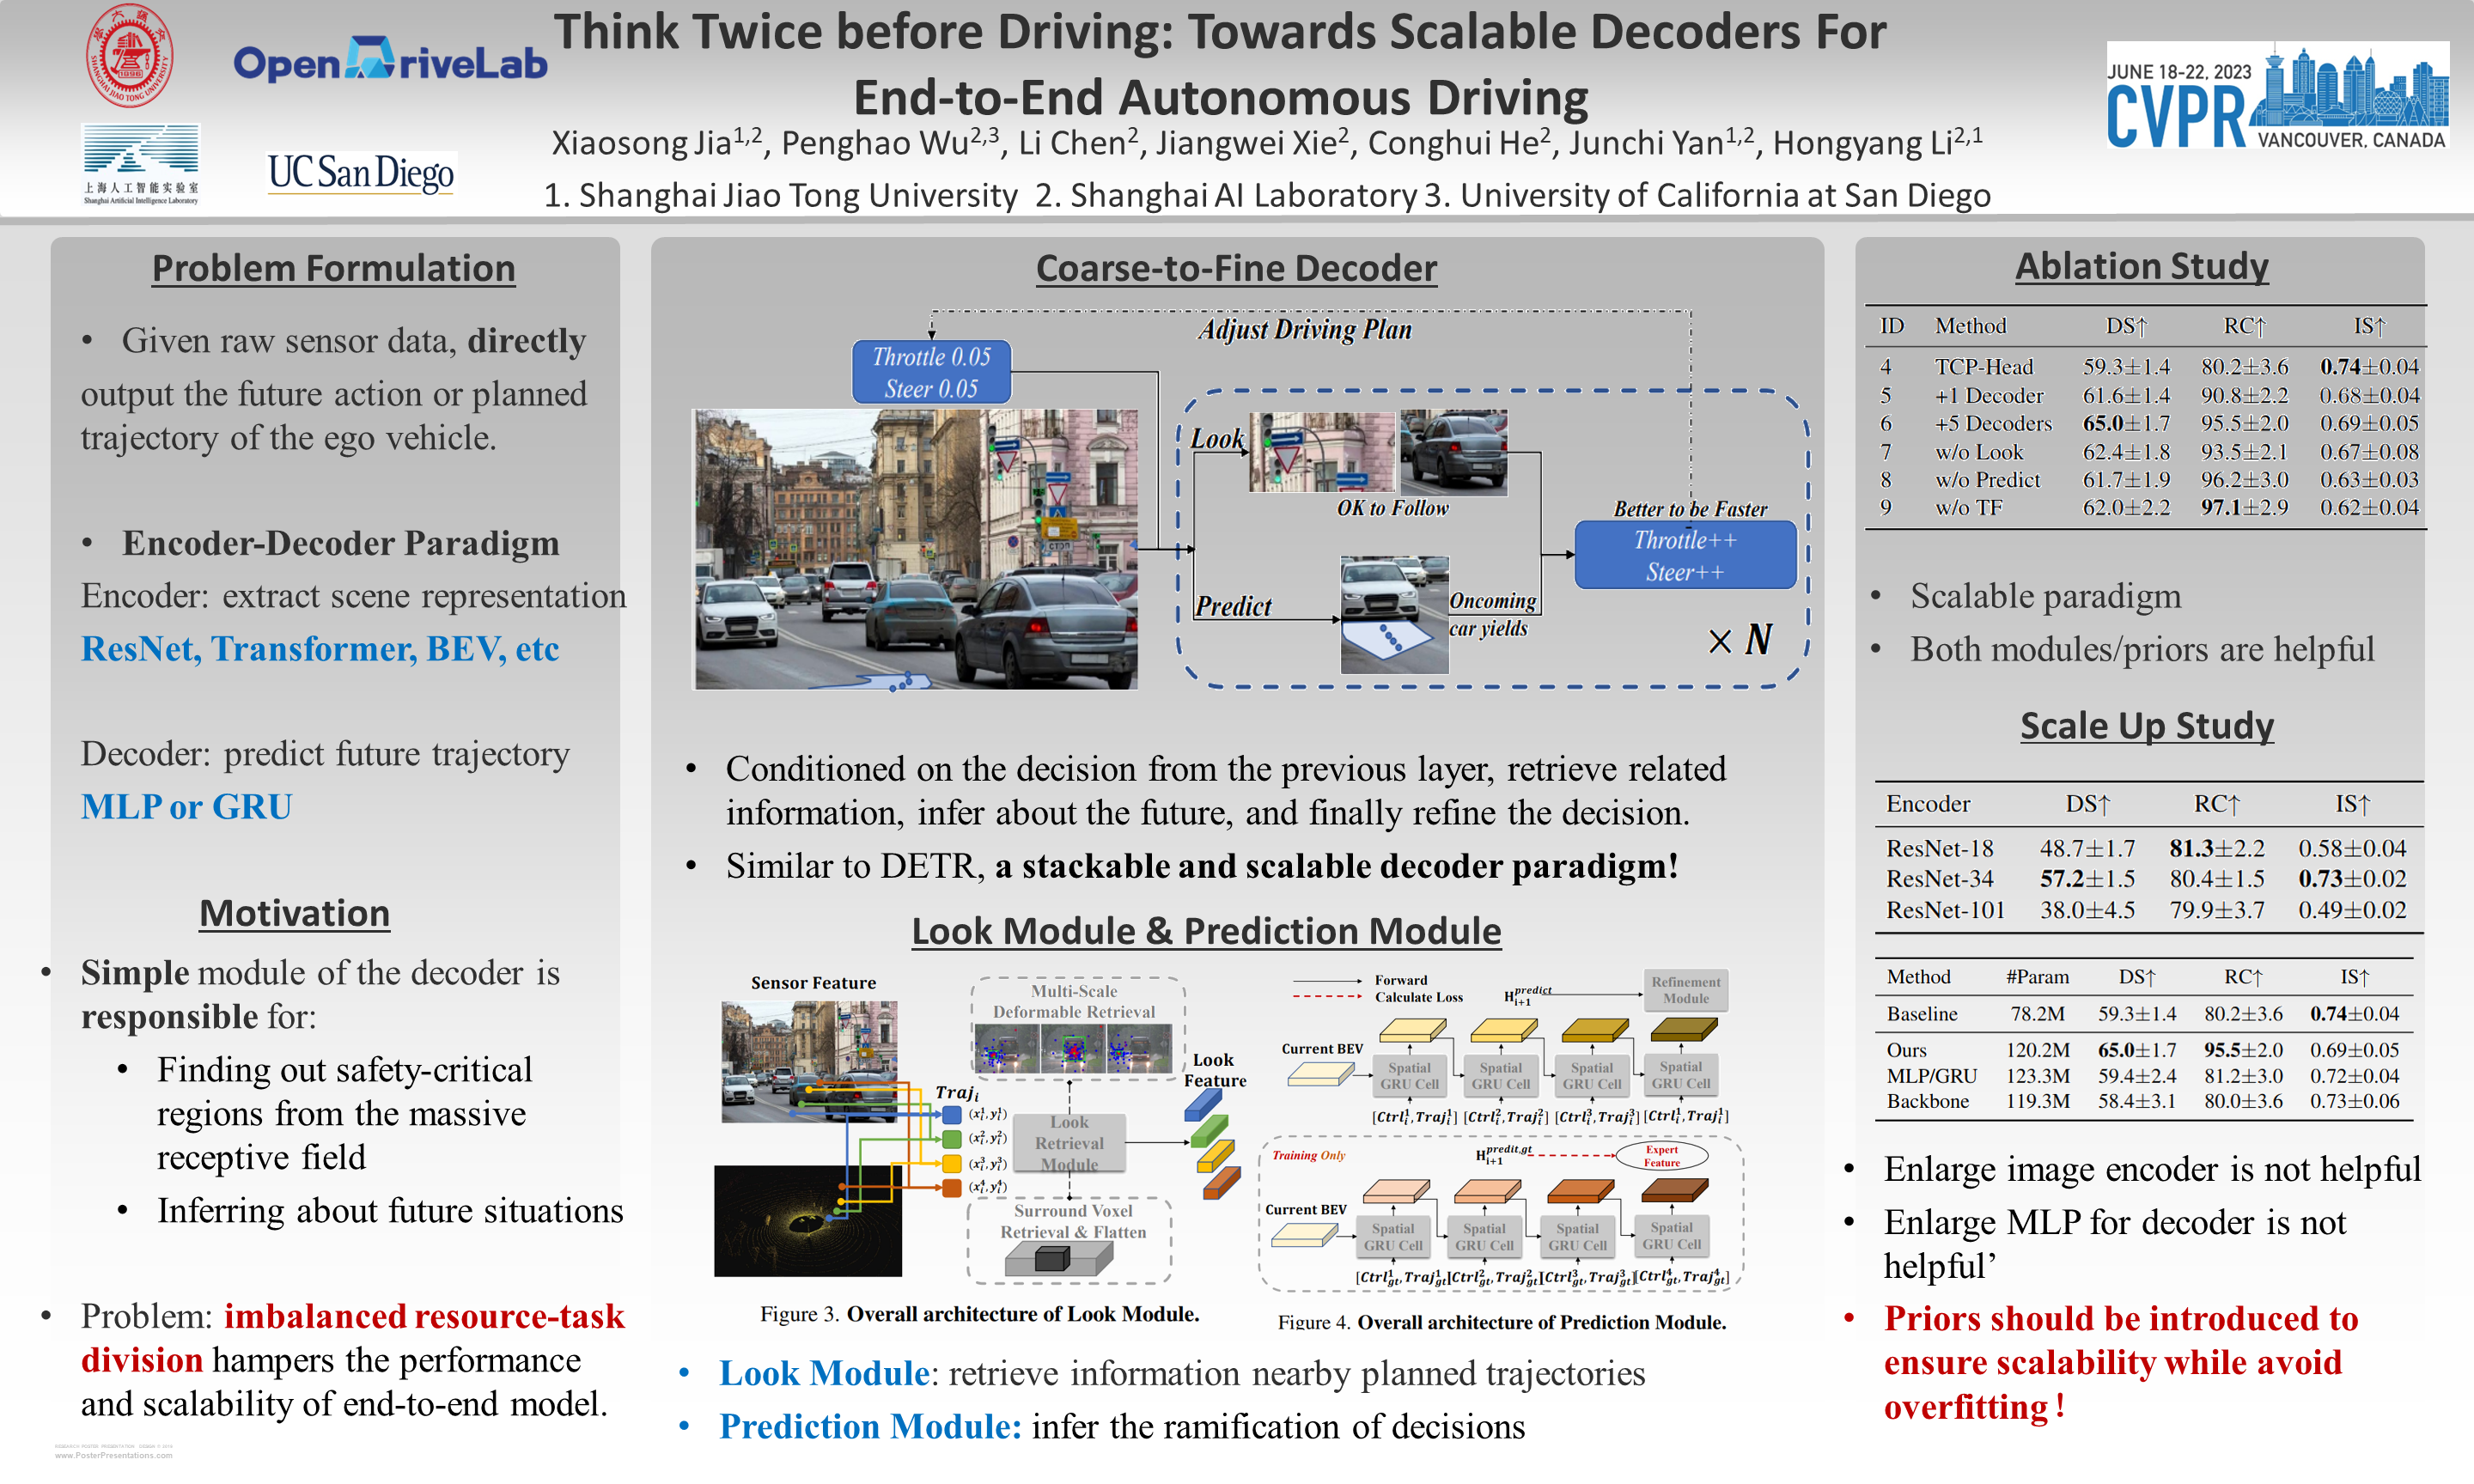 CVPR Poster Think Twice Before Driving Towards Scalable Decoders for